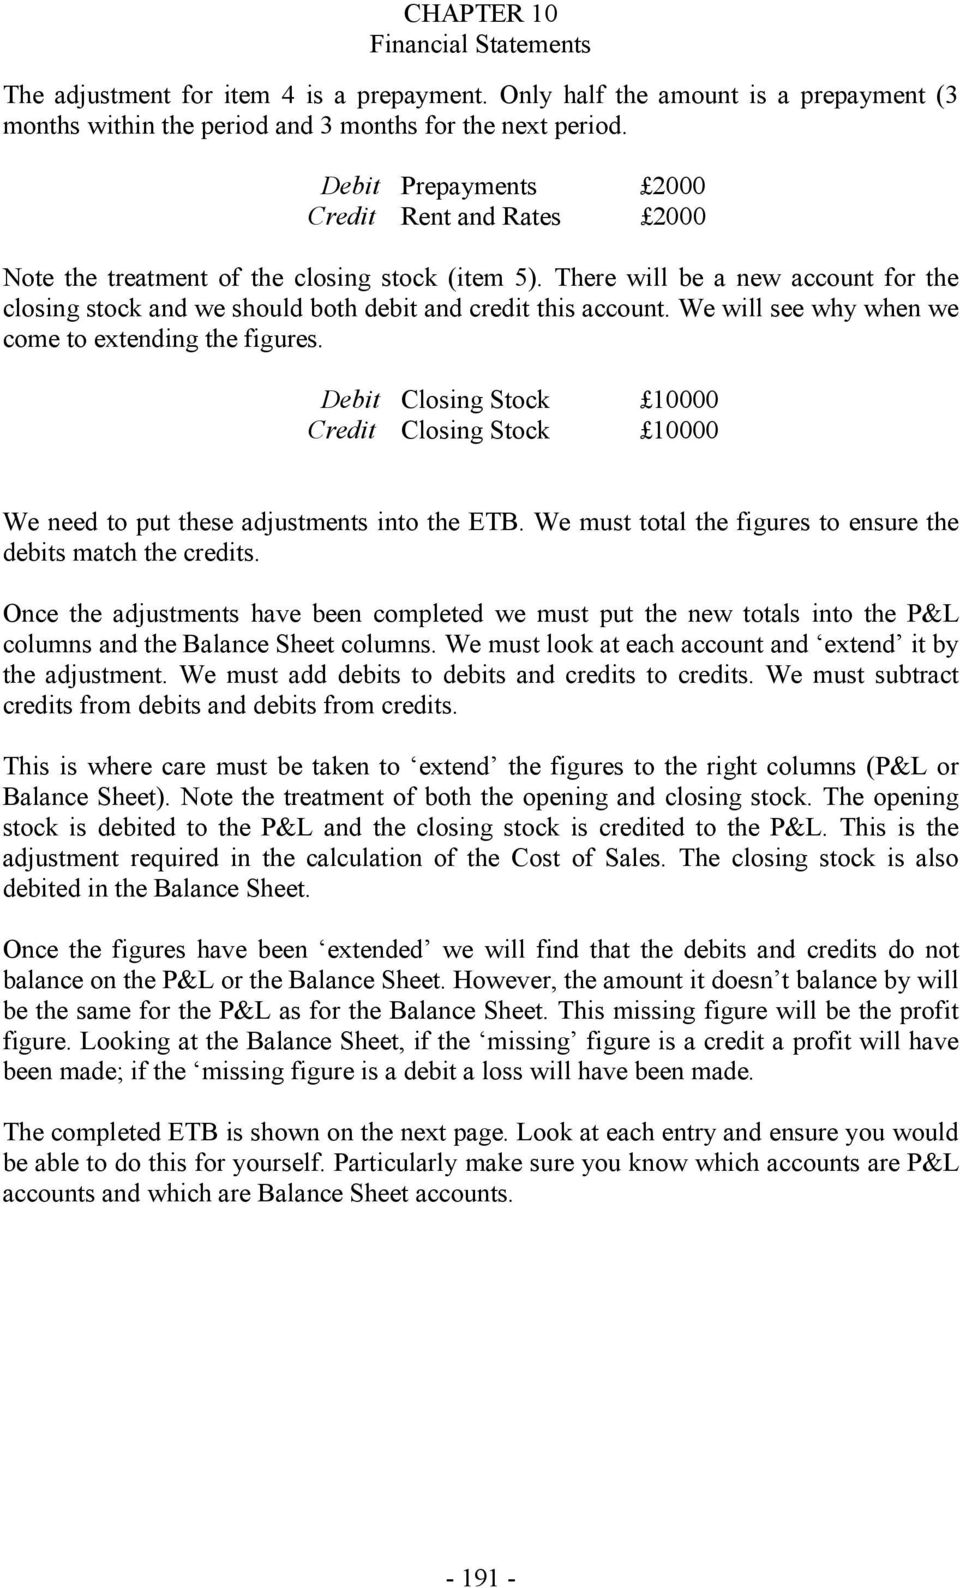 We will see why when we come to extending the figures. Debit Closing Stock 10000 edit Closing Stock 10000 We need to put these adjustments into the ETB.